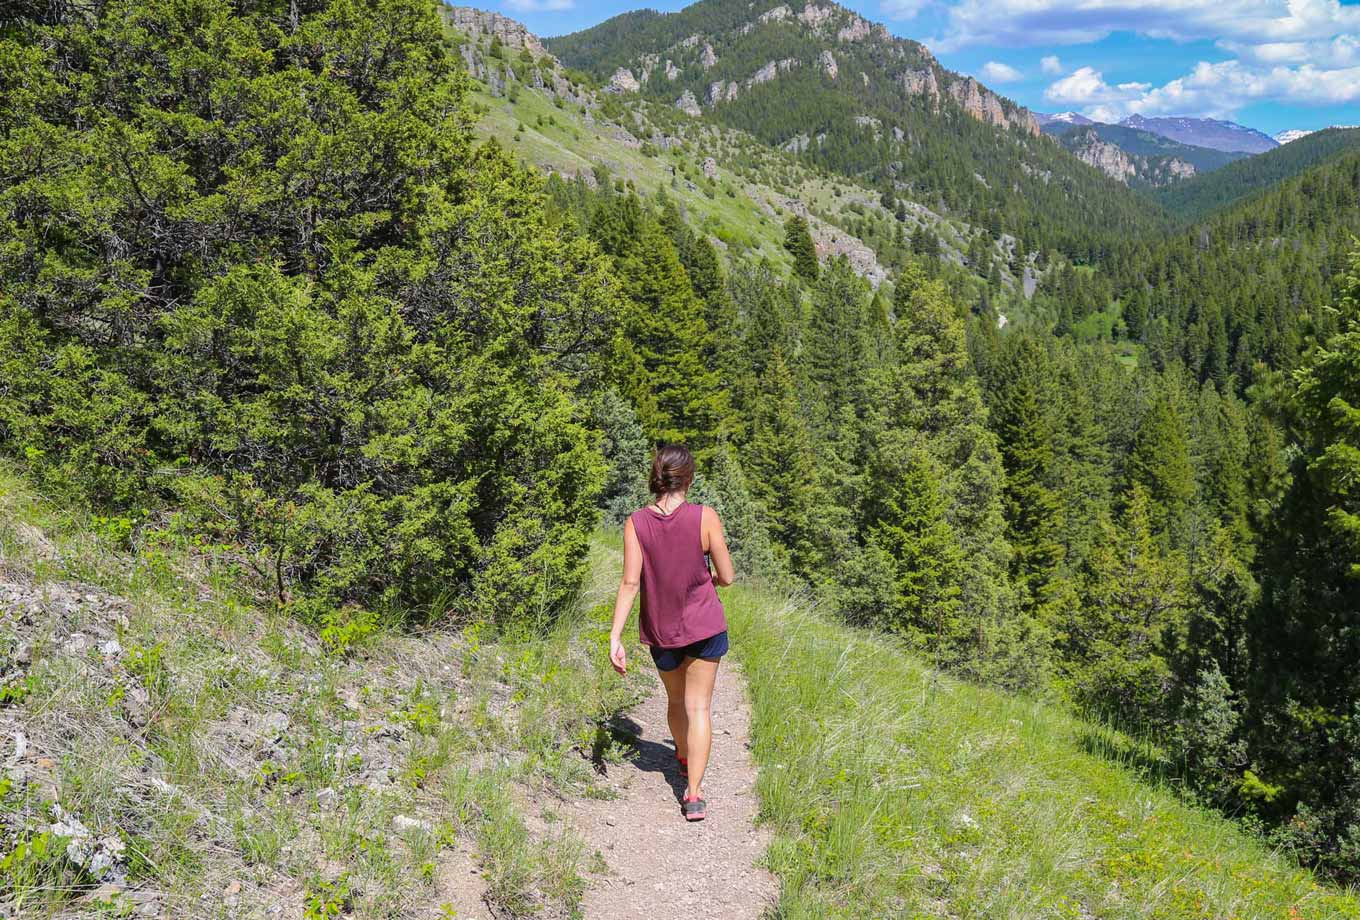 Summer hiking in Yellowstone National Park